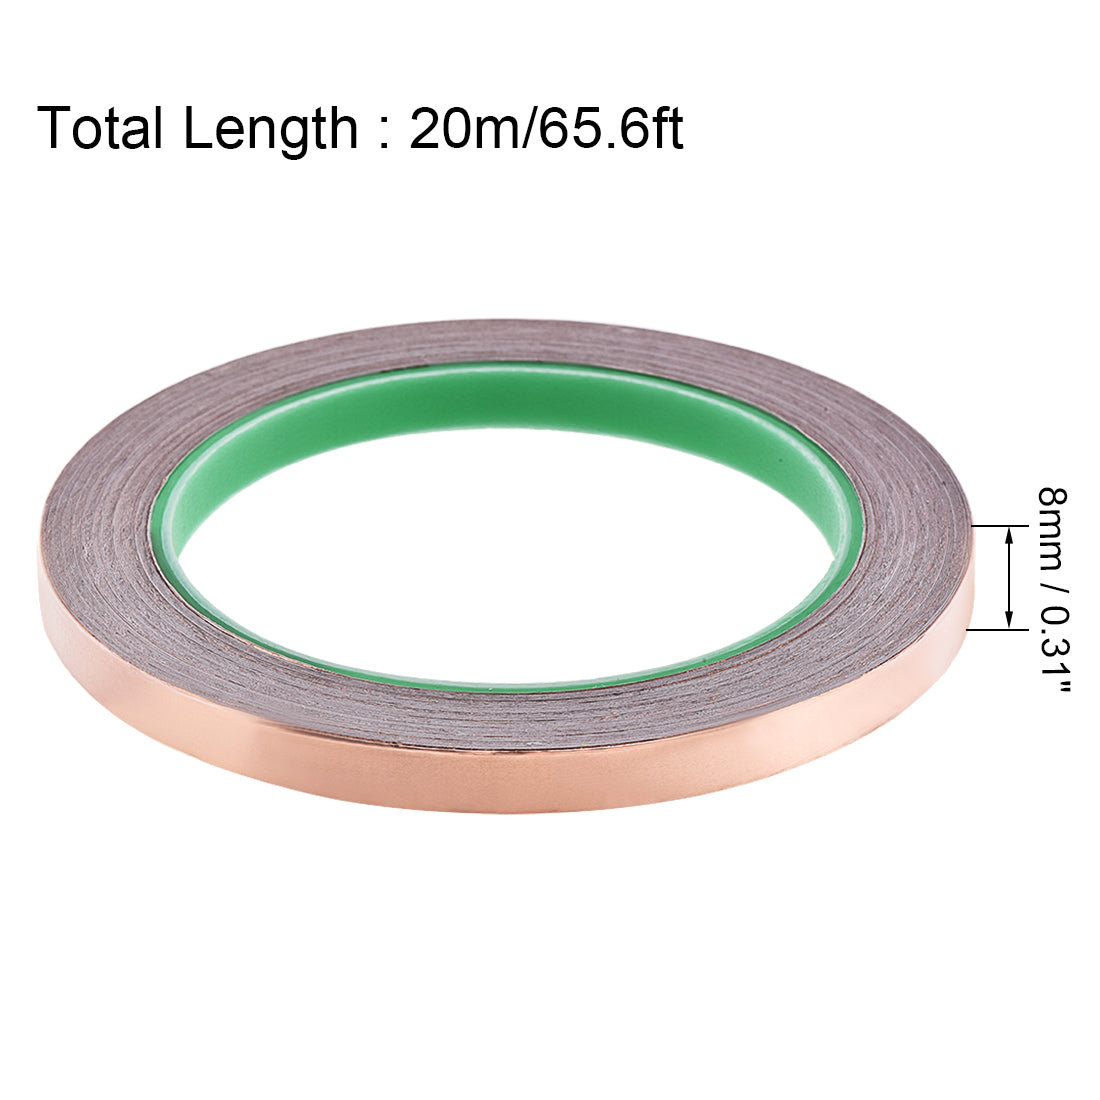 uxcell Uxcell Double Sided Conductive Tape Copper Foil Tape 8mm x 20m for EMI Shielding 2 Roll